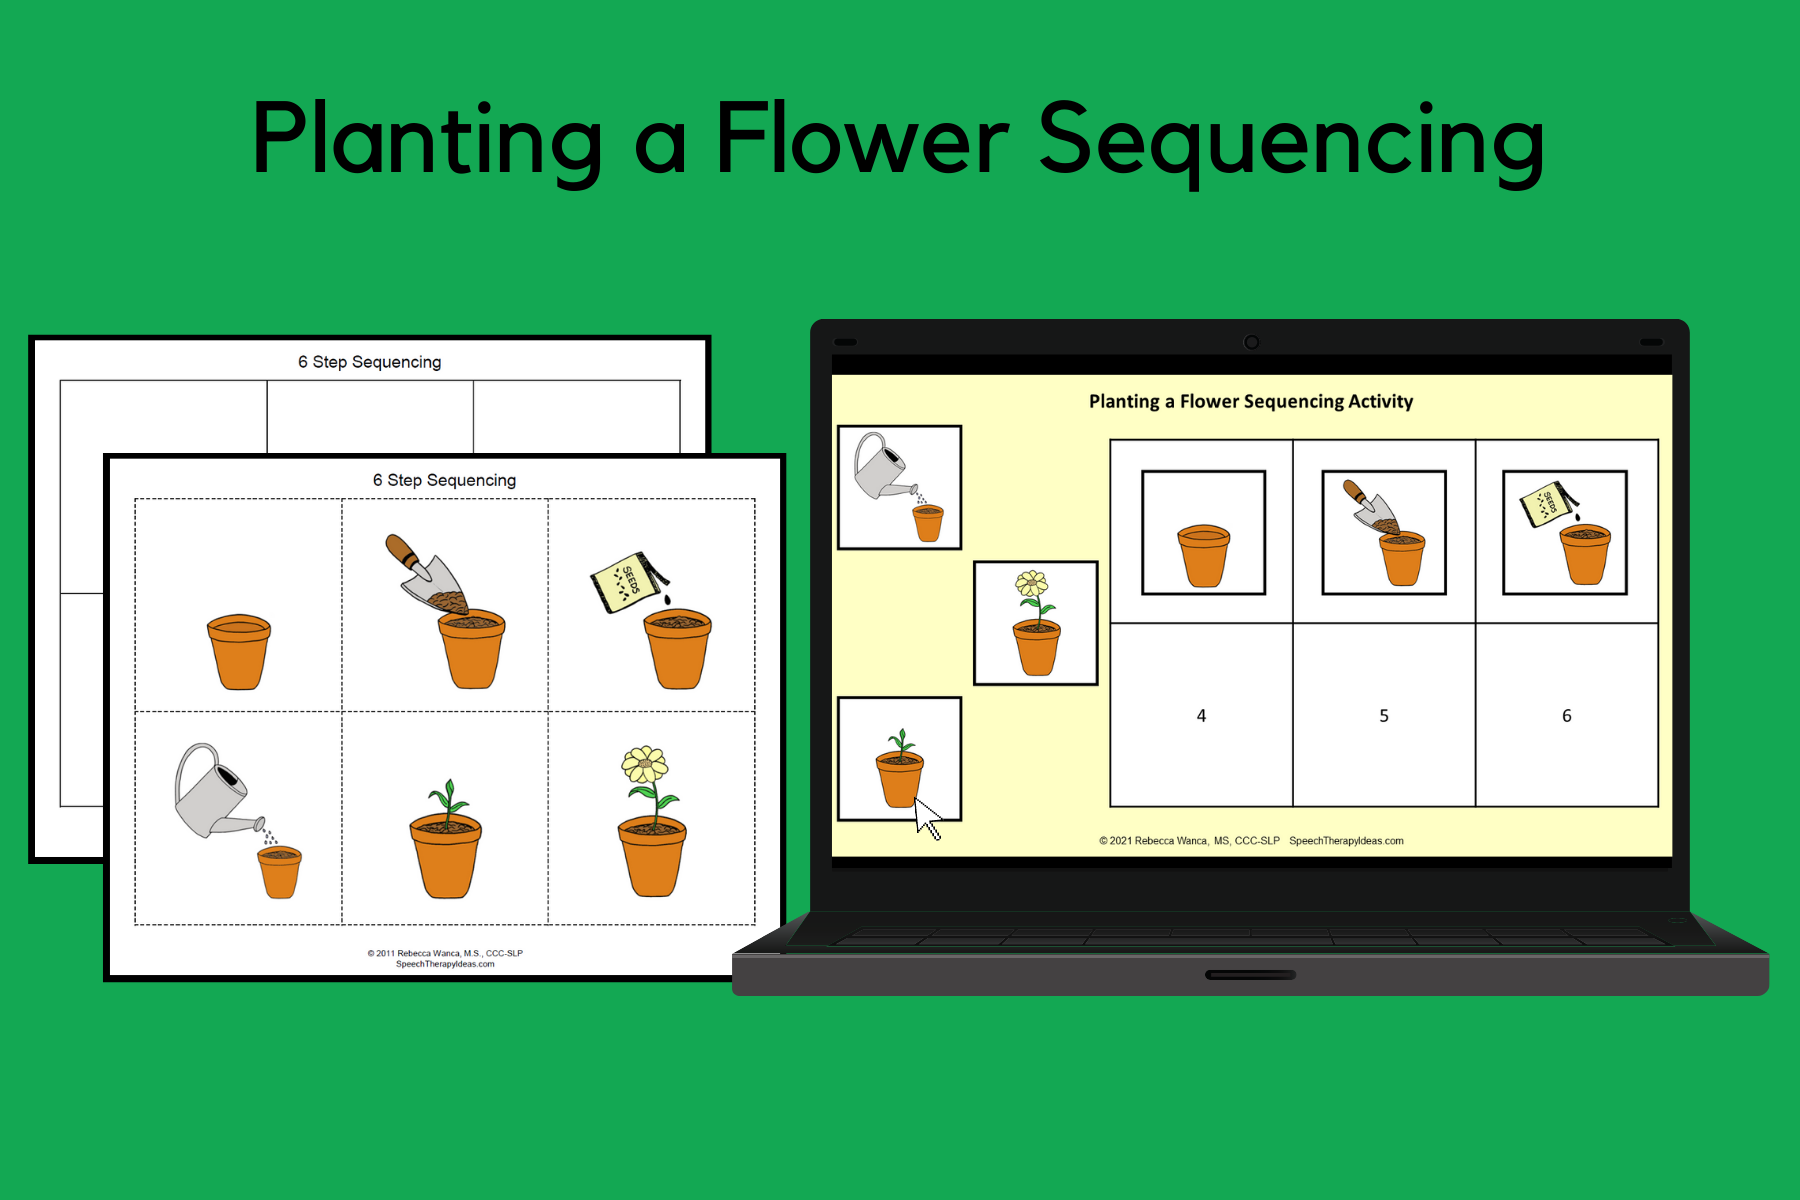 Planting a Flower Sequencing Activity